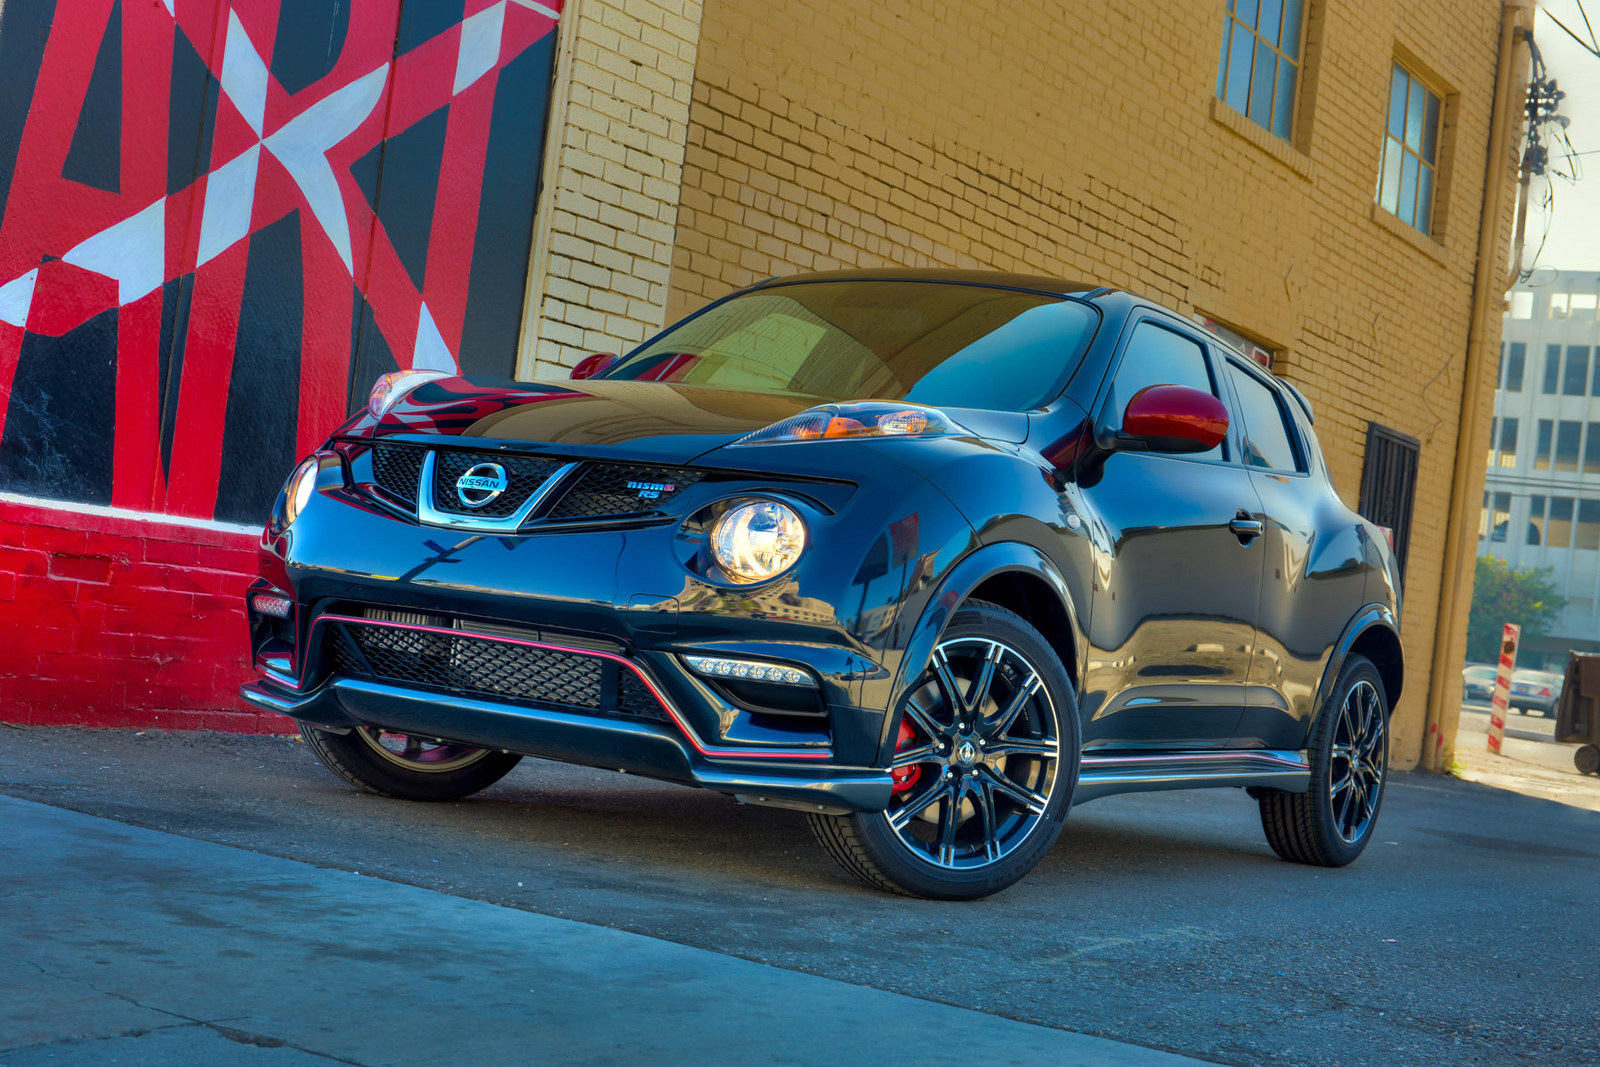 Nissan Prices The 14 Juke Nismo Rs From 26 1 In The U S Carscoops